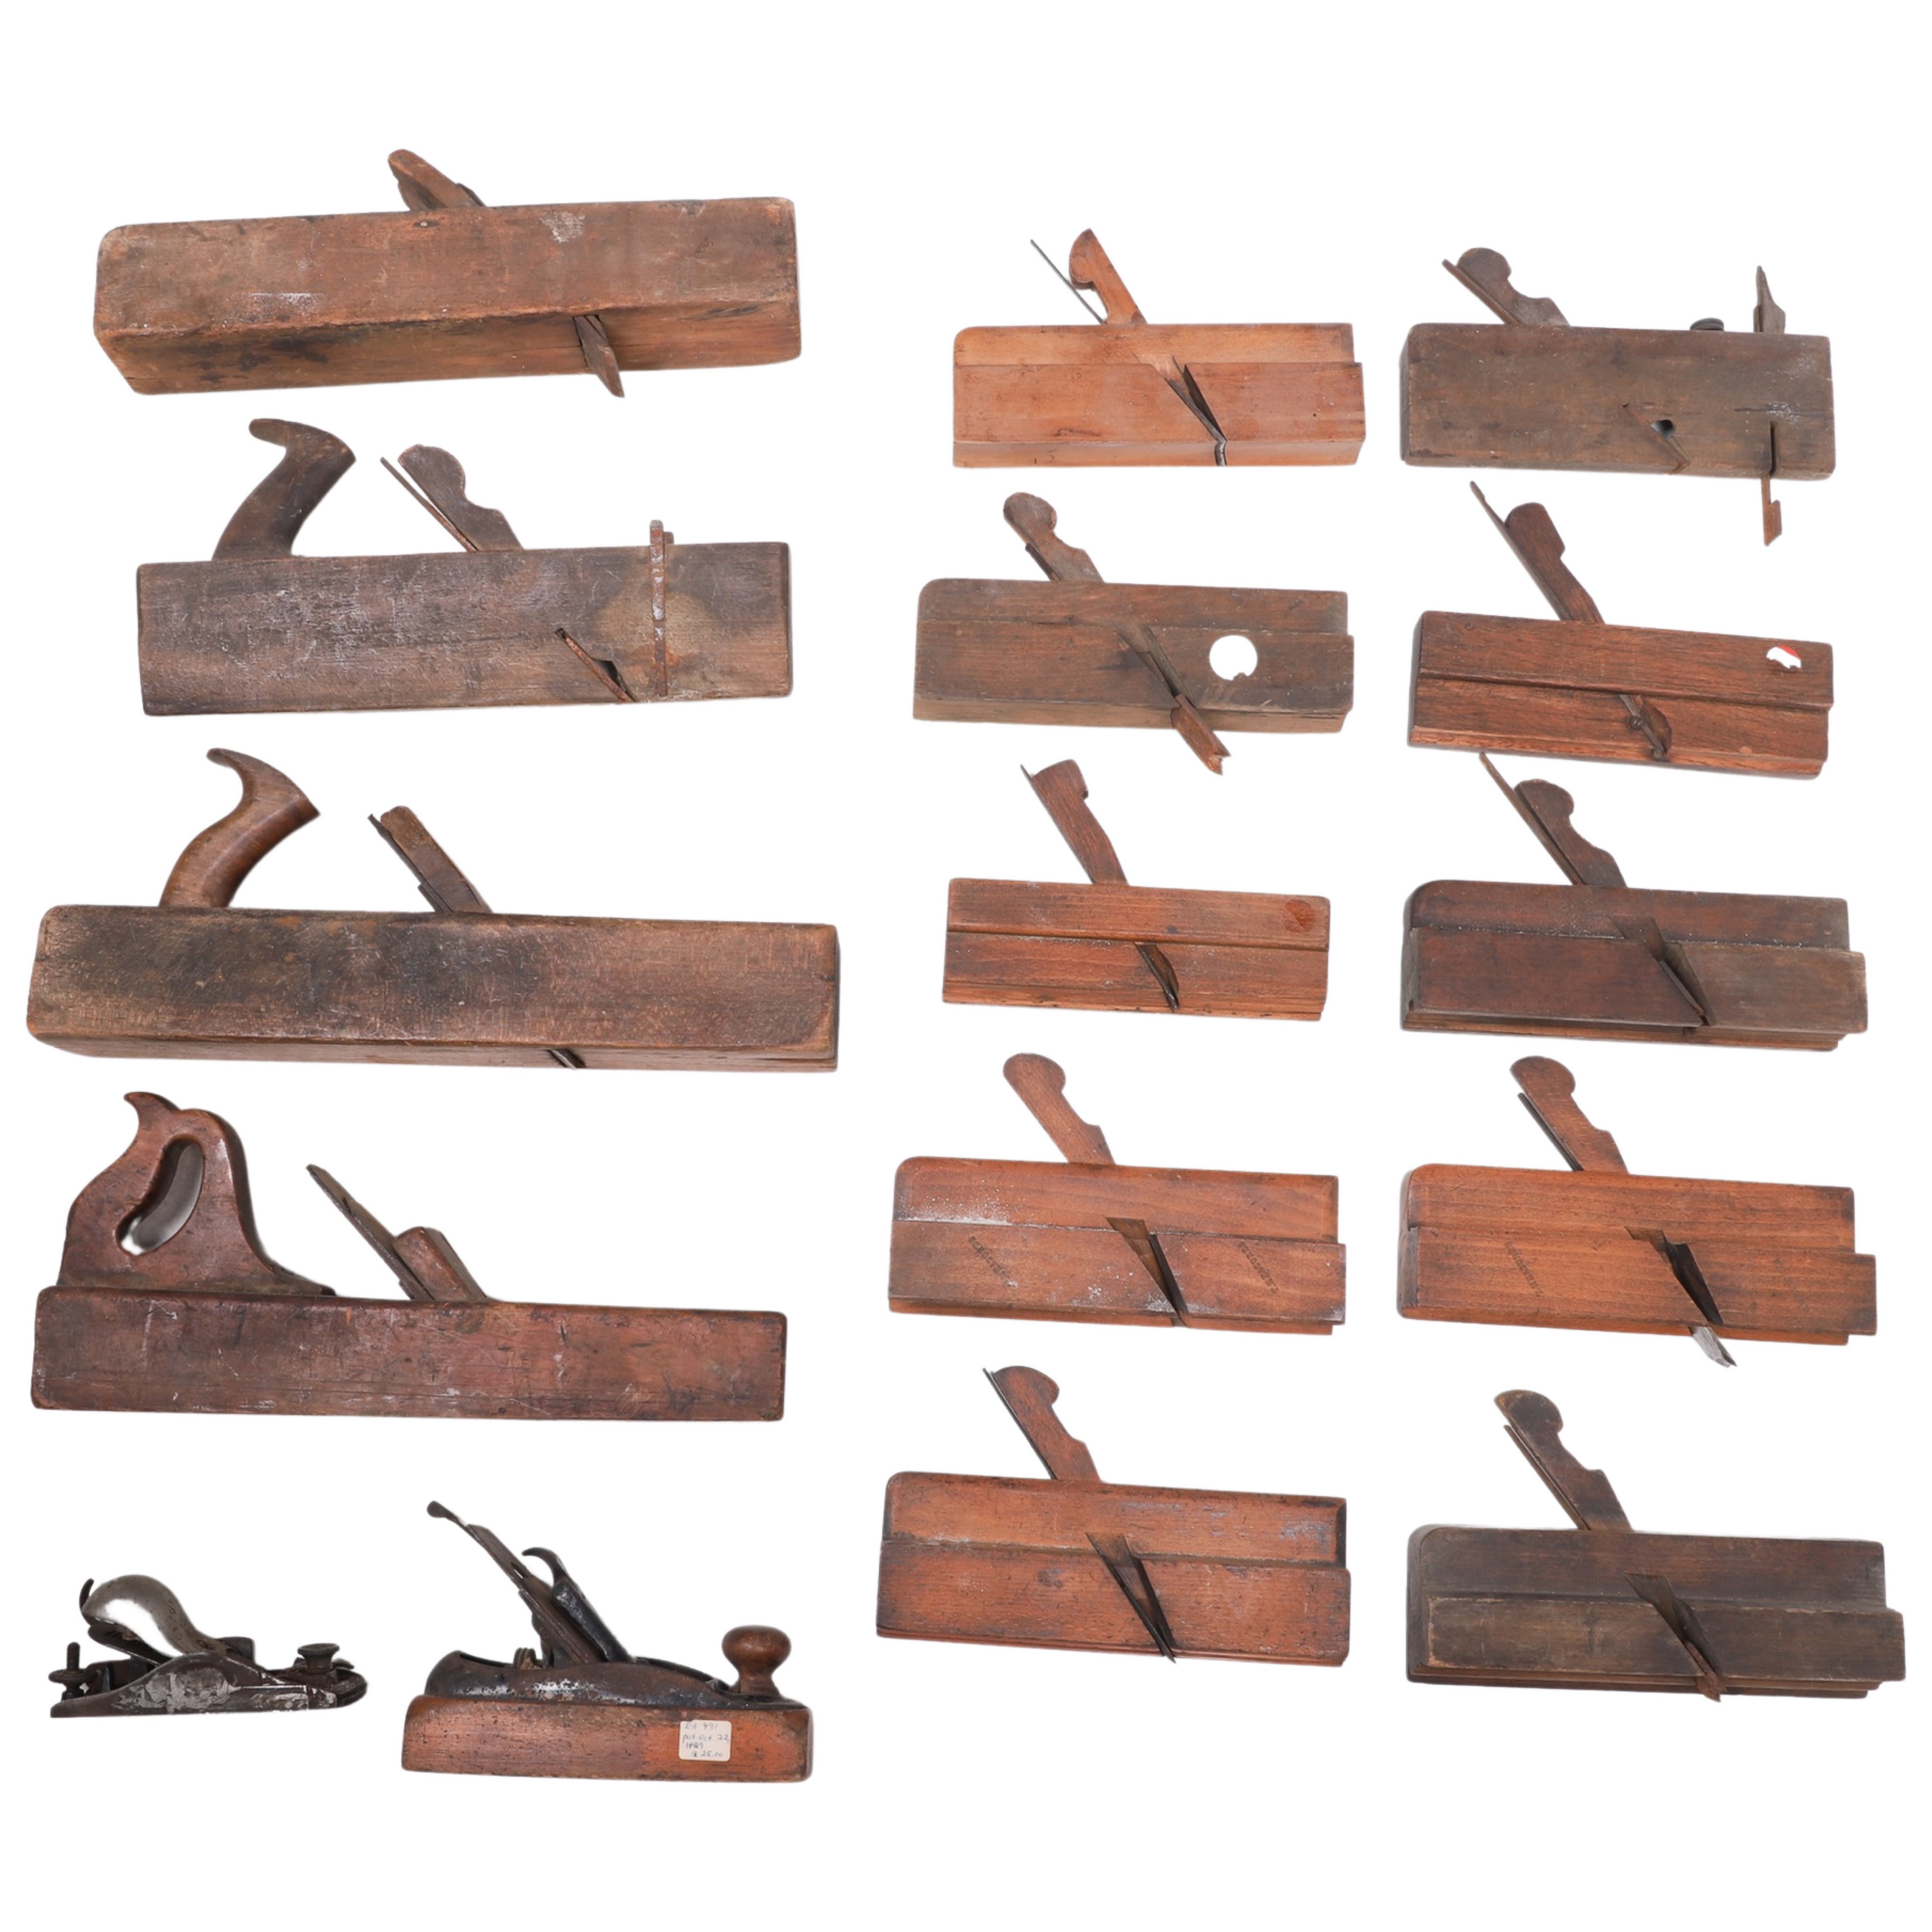 (16) Antique wood hand planes including